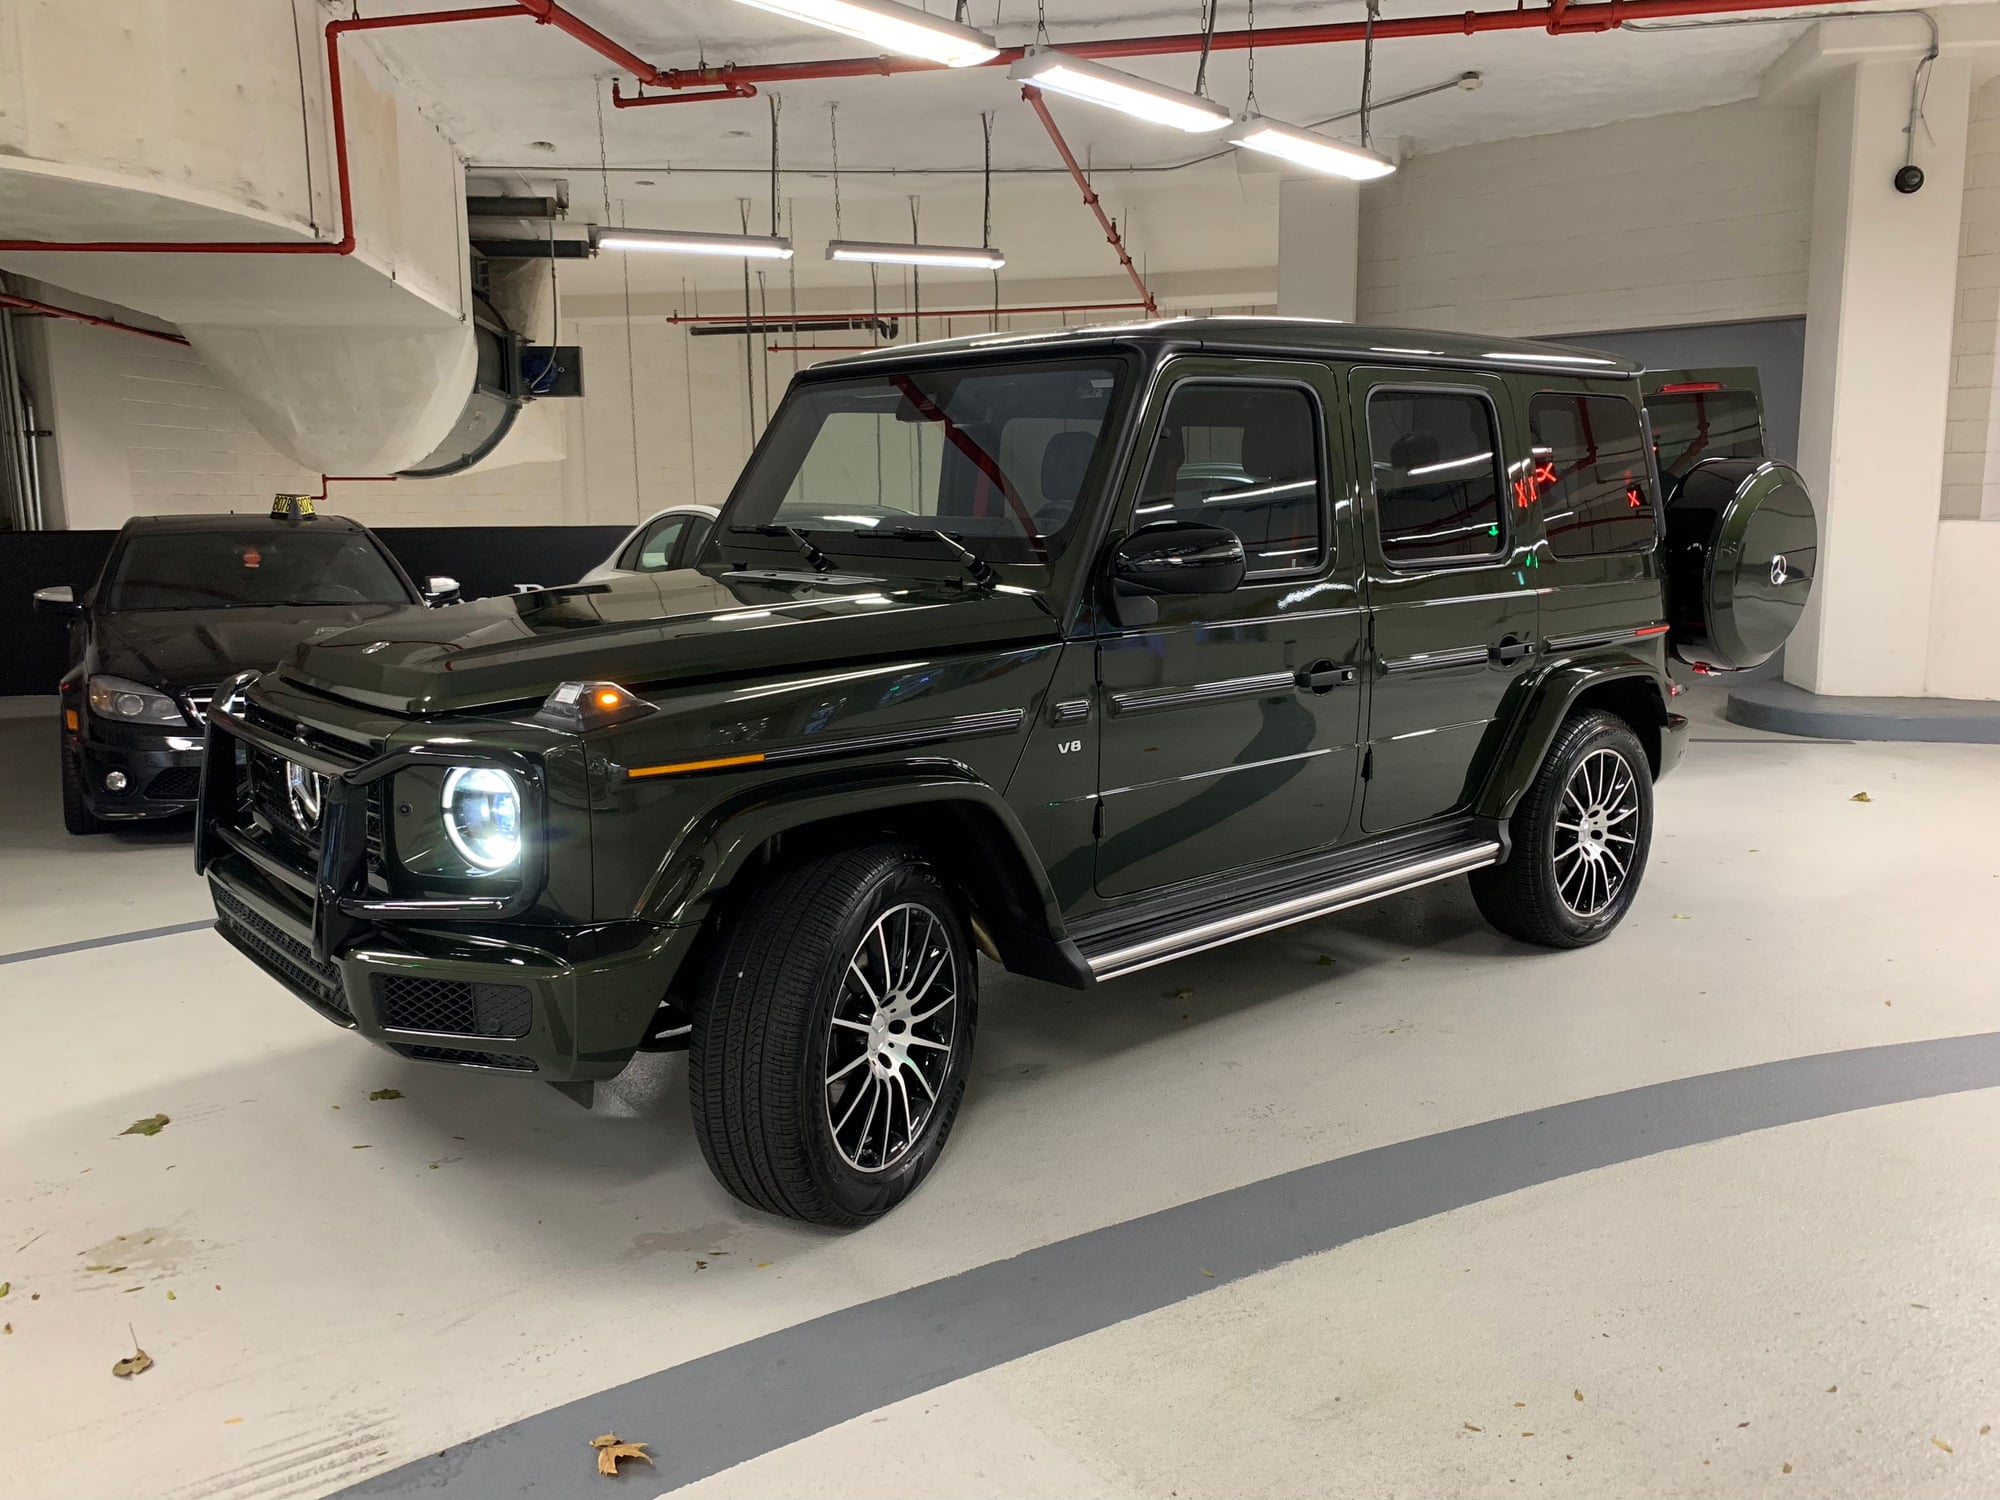 Wheels and Tires/Axles - 2019 NEW OEM Factory Mercedes-Benz AMG G550 Night Ed Black 20 WHEELS TIRES - New - All Years Mercedes-Benz G550 - New York, NY 10036, United States